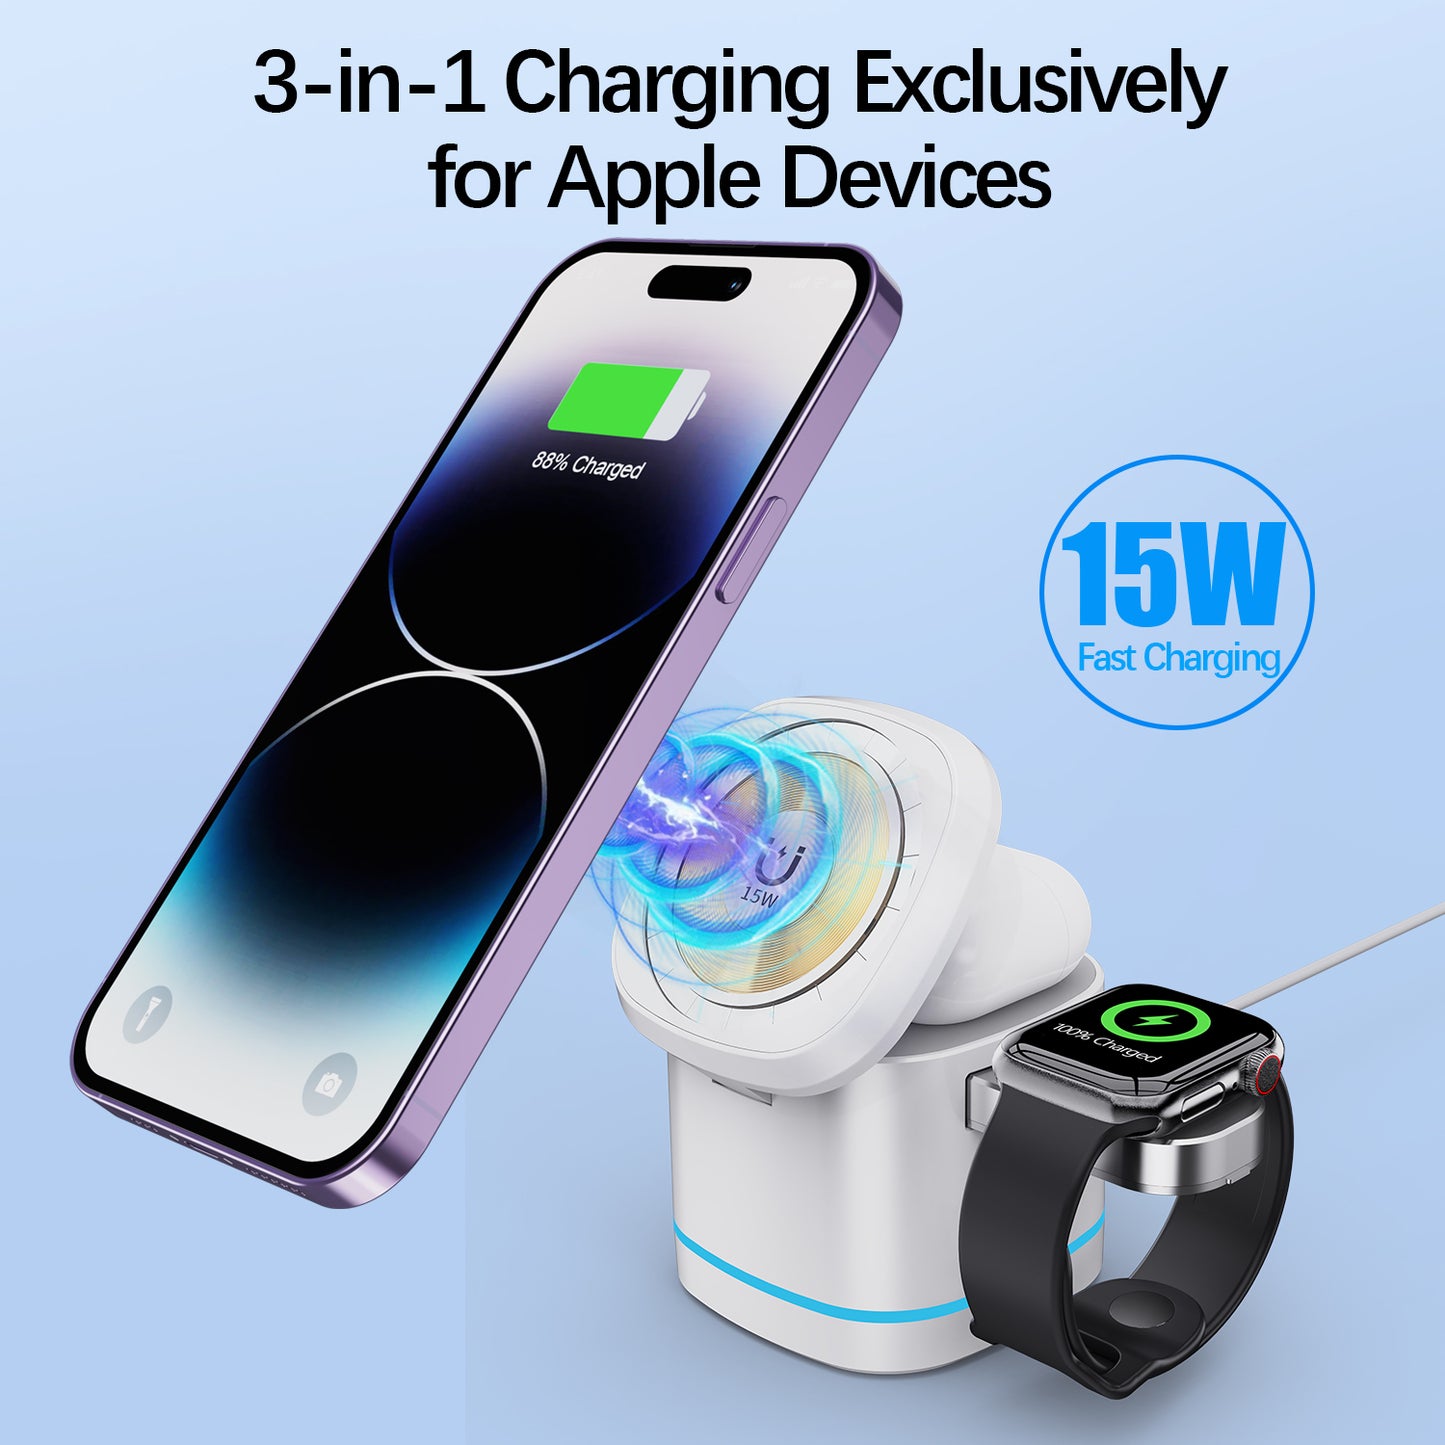 Magnetic suction 3-in-1 Wireless charge Exclusivelyfor Apple Devices Portable hidden wireless charge 15W for iPhone 12/13/14 Series,iwatch,airpods